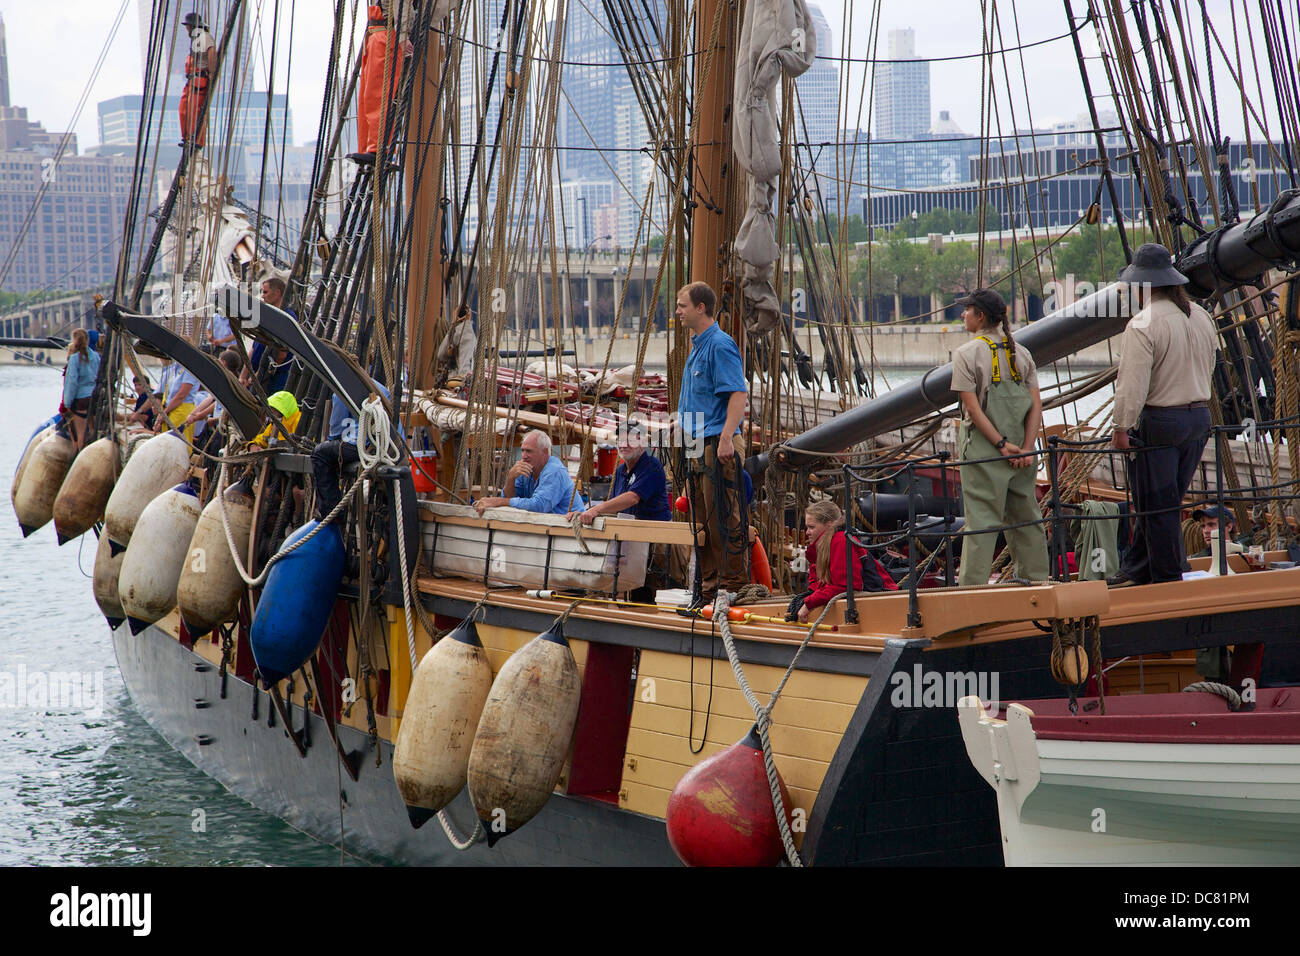 The brig Flagship Niagara prepares to dock at Chicago's Navy Pier for Tall Ships 2013 Stock Photo